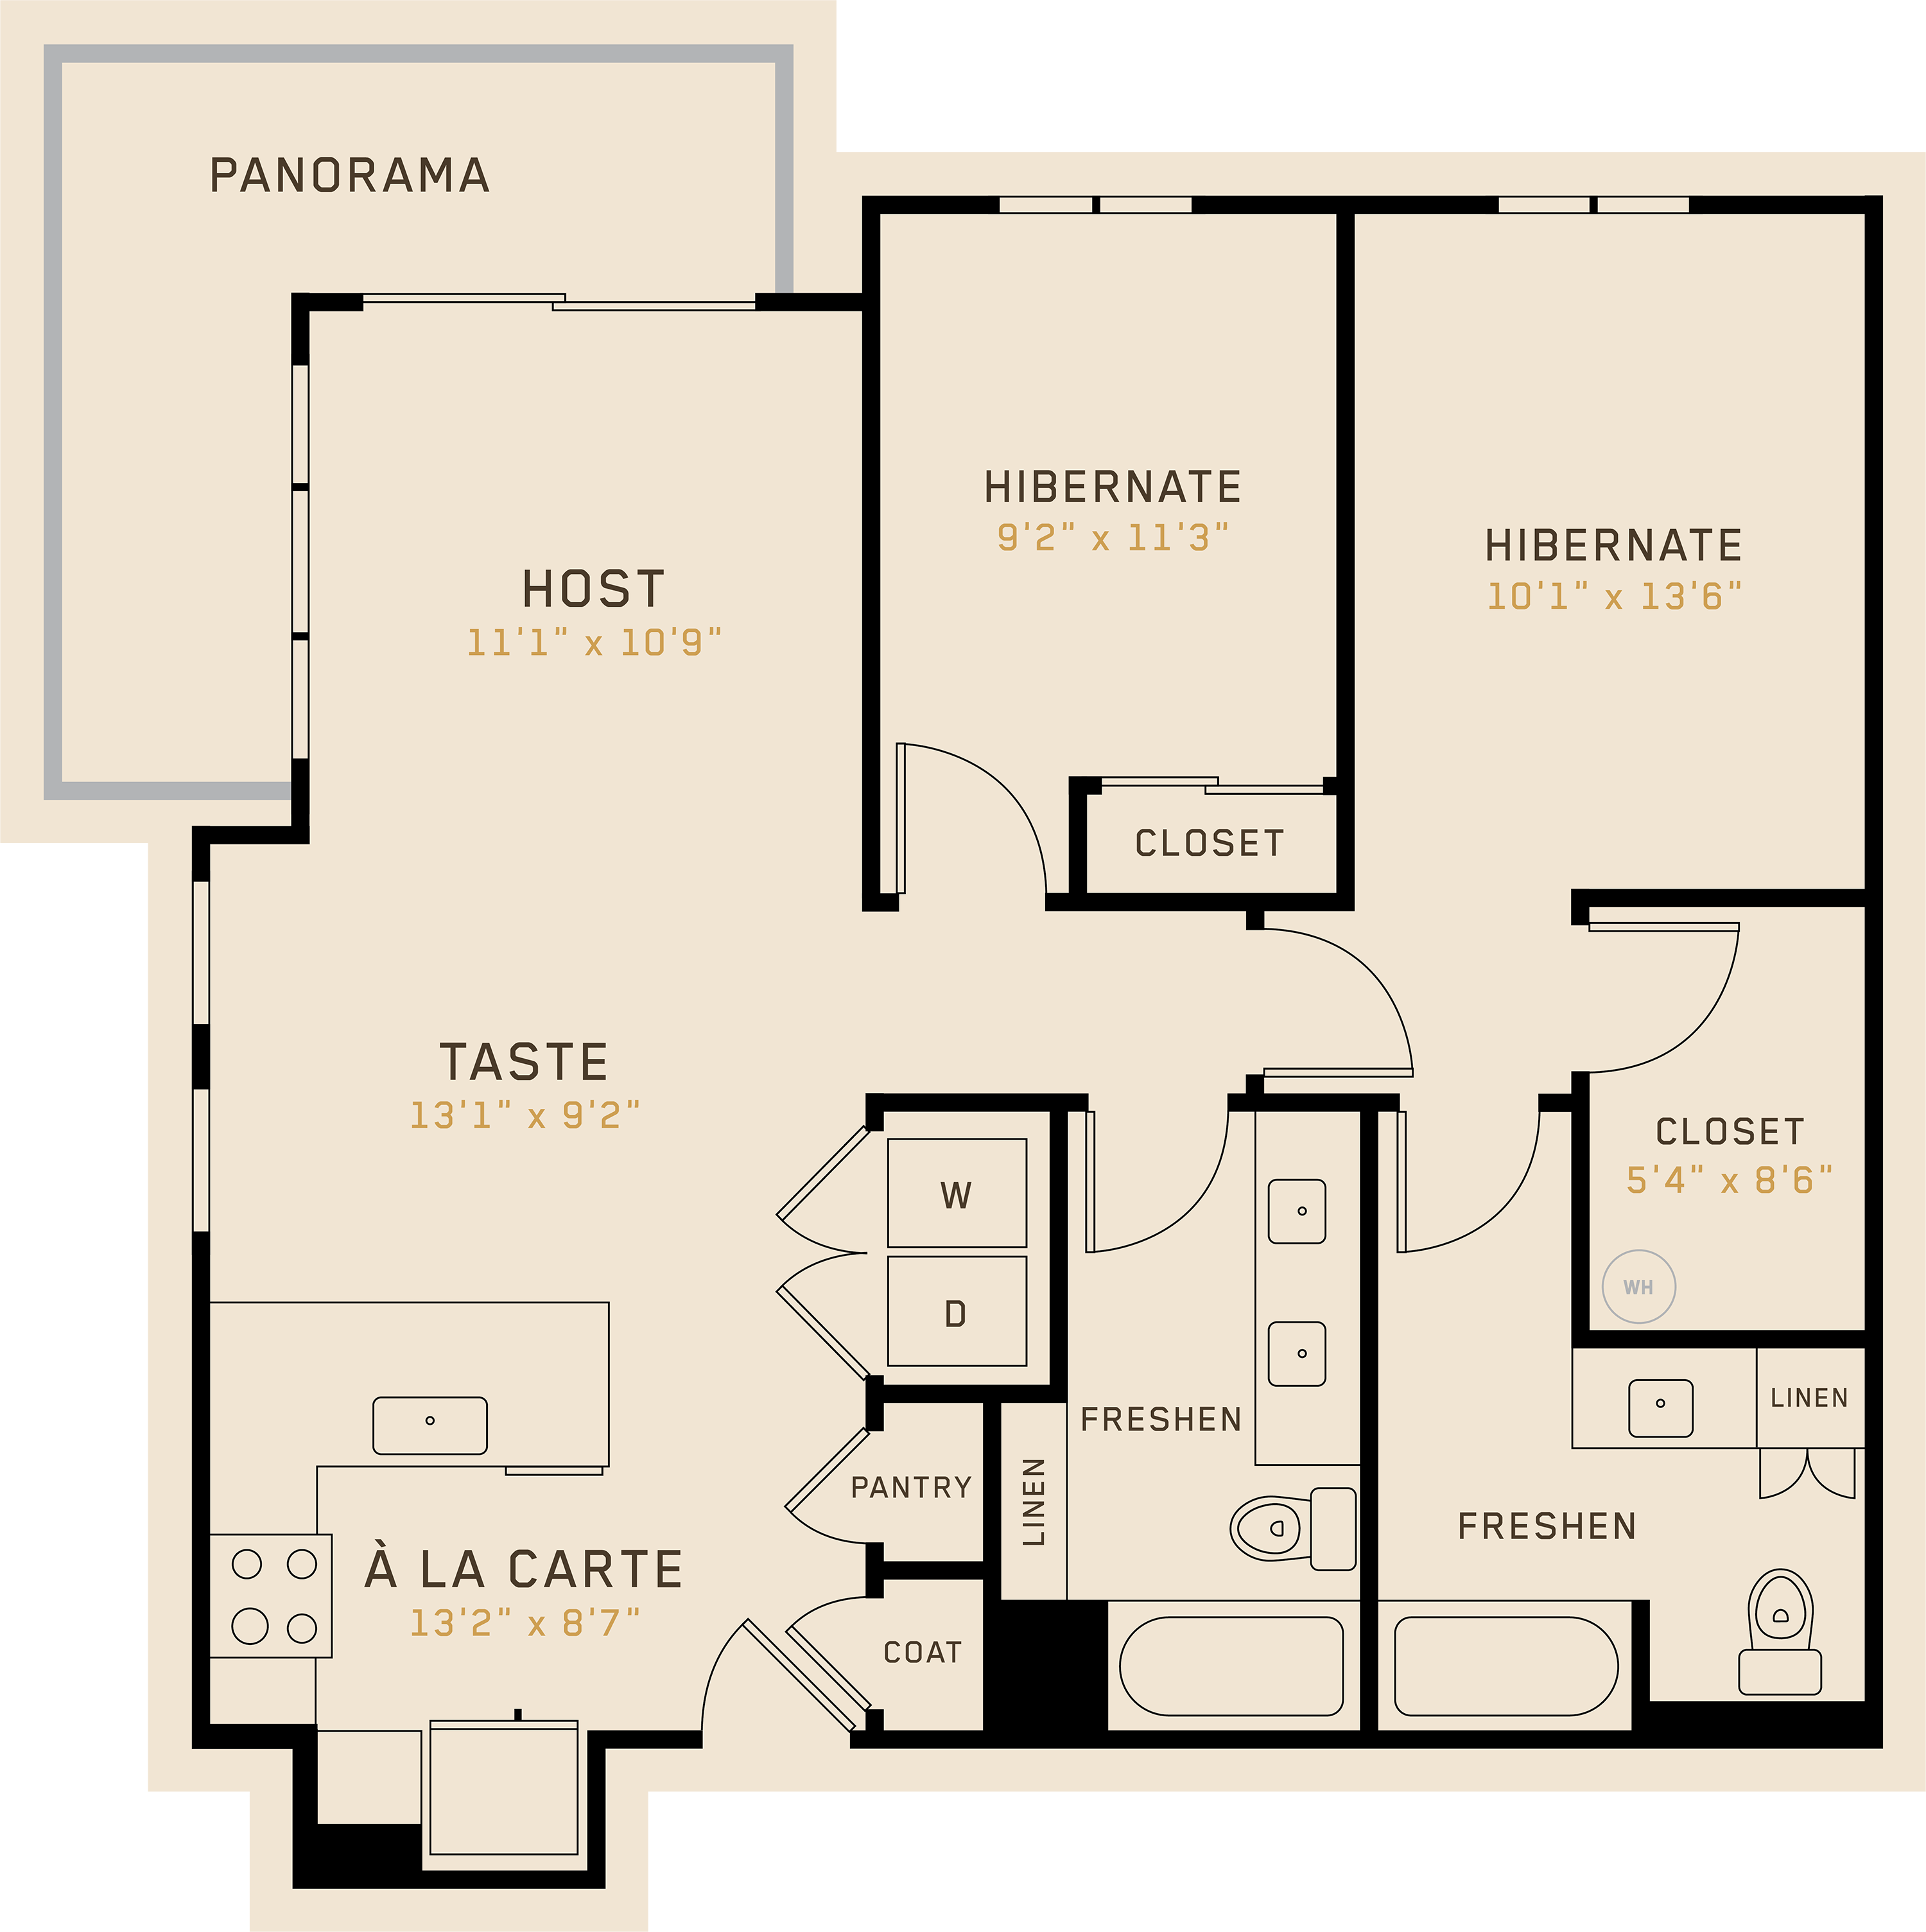 B2I floor plan featuring 2 bedrooms, 2 bathrooms, and is 1,036 square feet